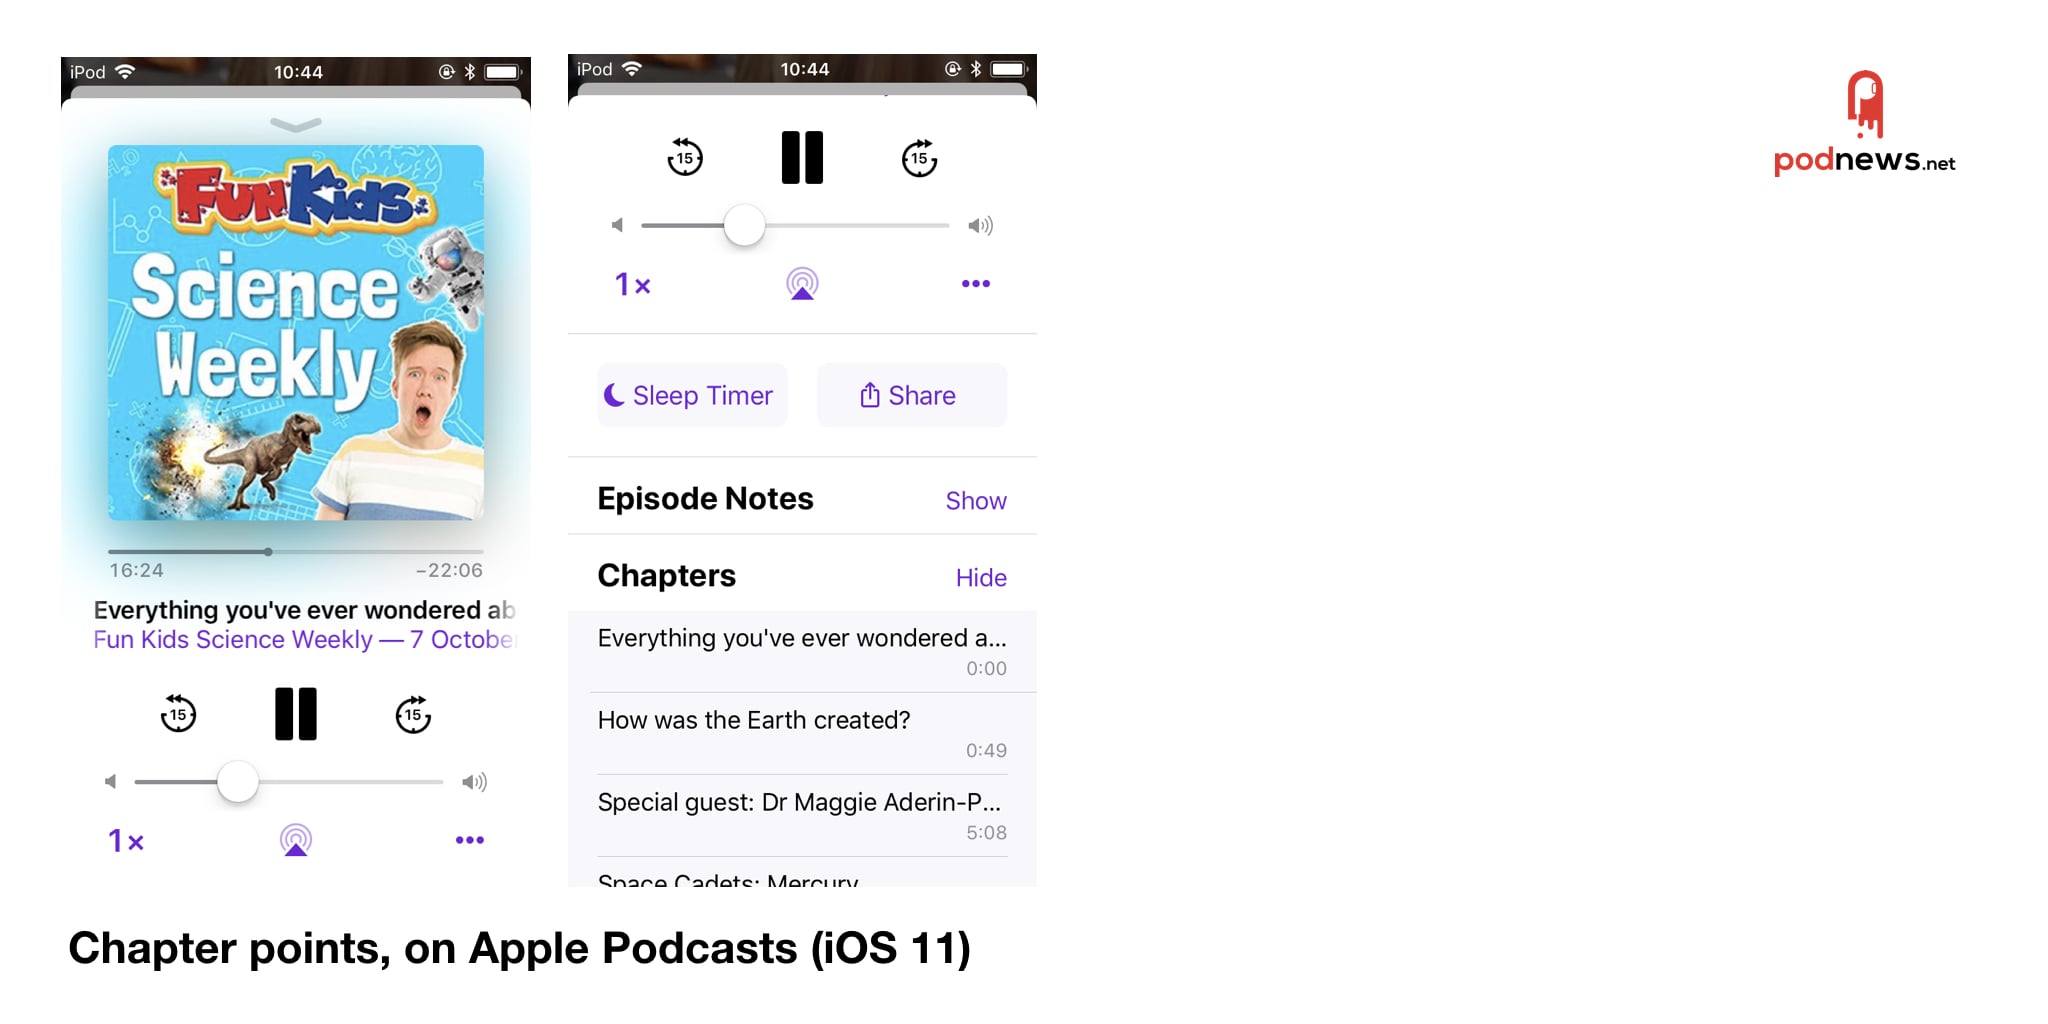 How to View Podcast Images and Chapters